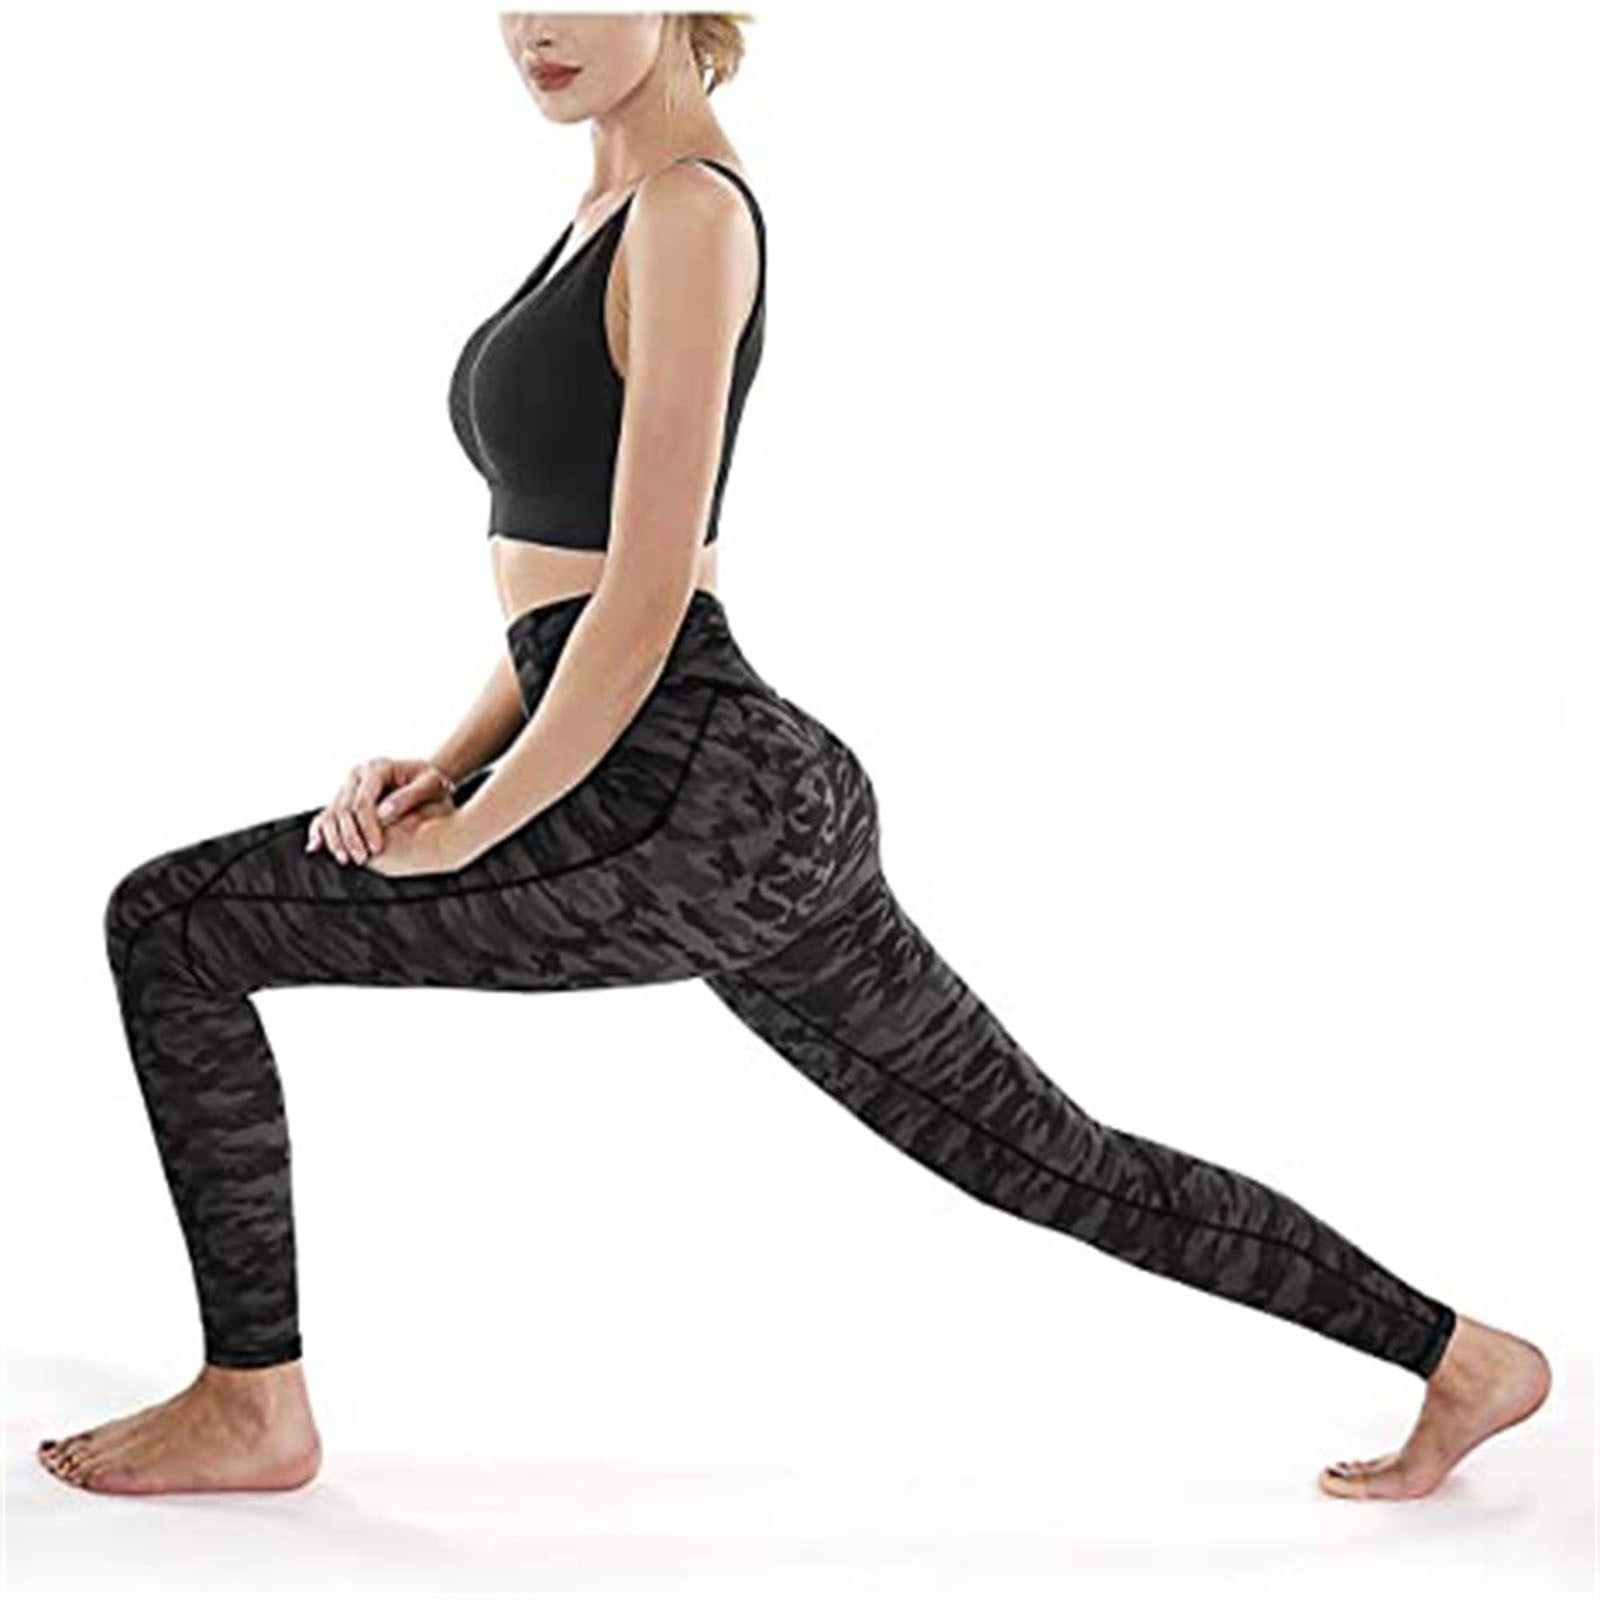 High Waisted Yoga Running Leggings With Leopard Print And Camouflage Design  For Fitness And Sports Butter Soft And Comfortable Ladies Sweatspants From  Cjz19861115, $22.47